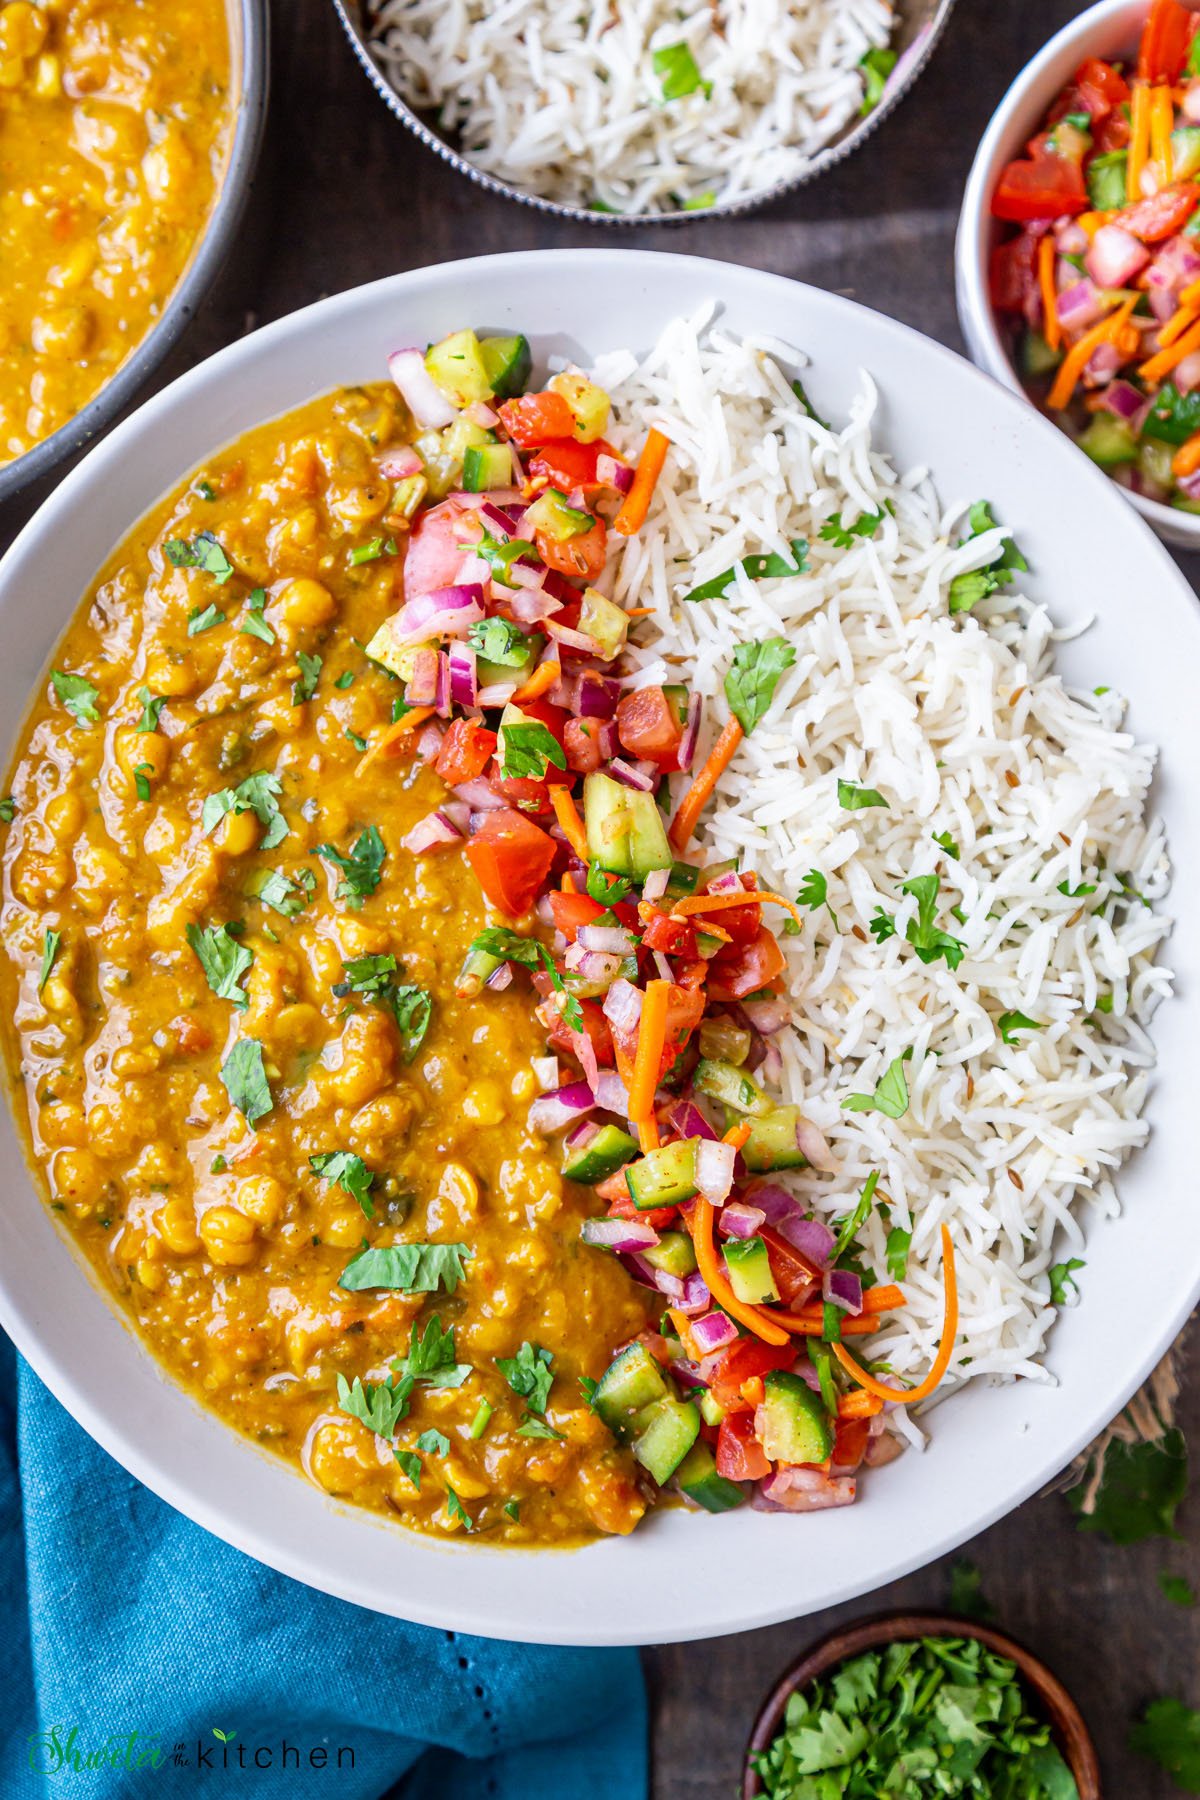 Chana dal served with rice on a plate with kachumber salad